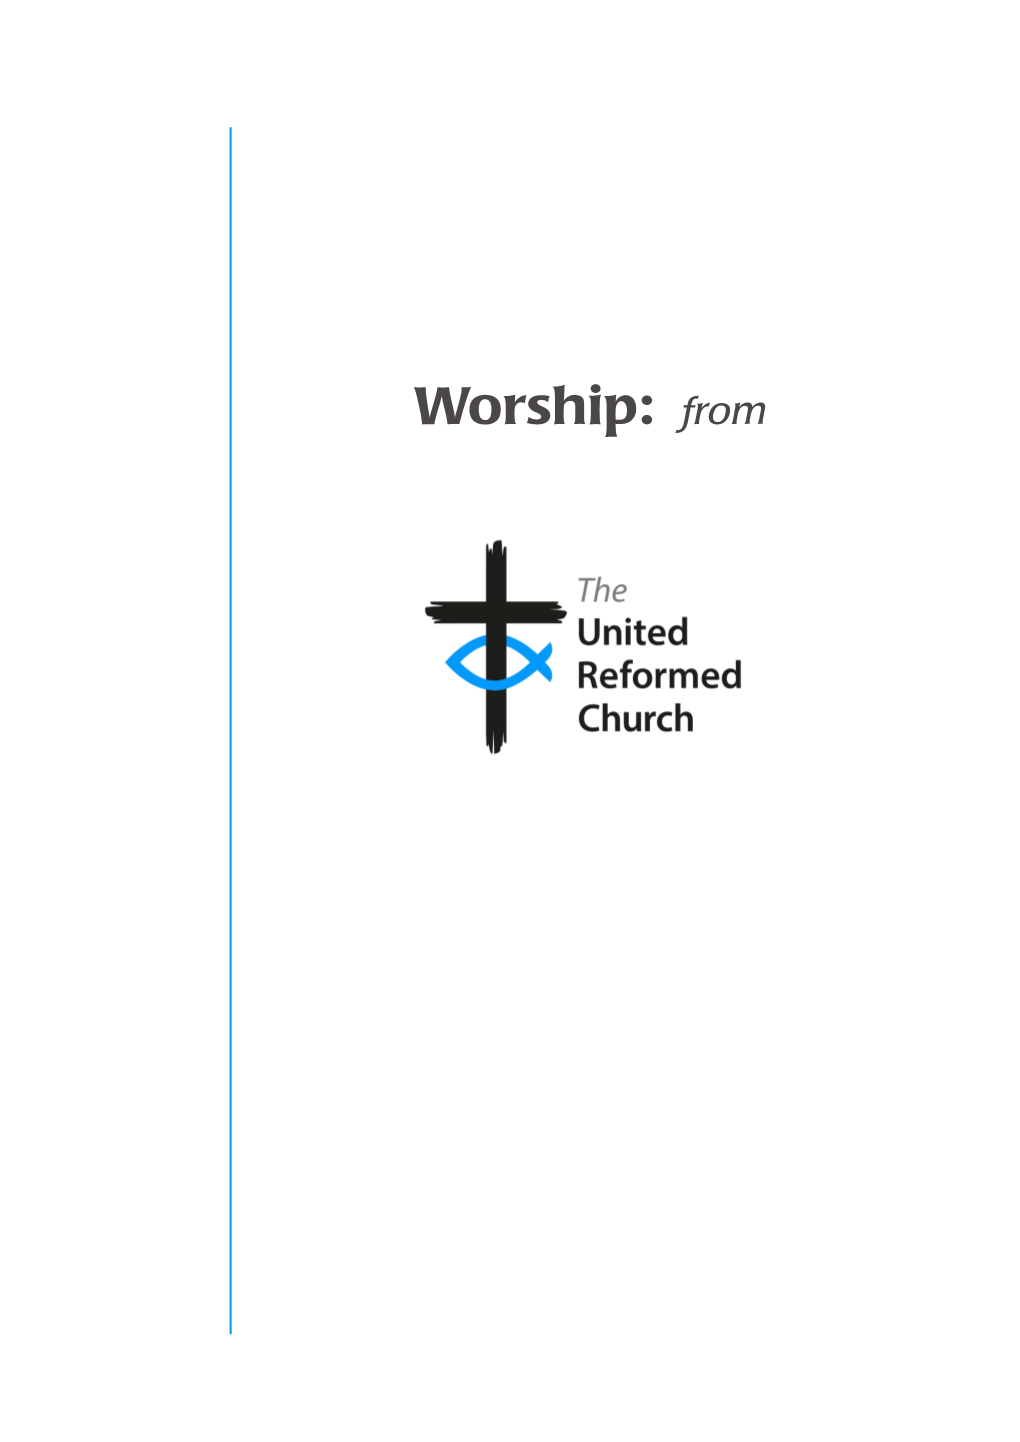 Worship: from ISBN 0 85346 219 4 © the United Reformed Church, 2003